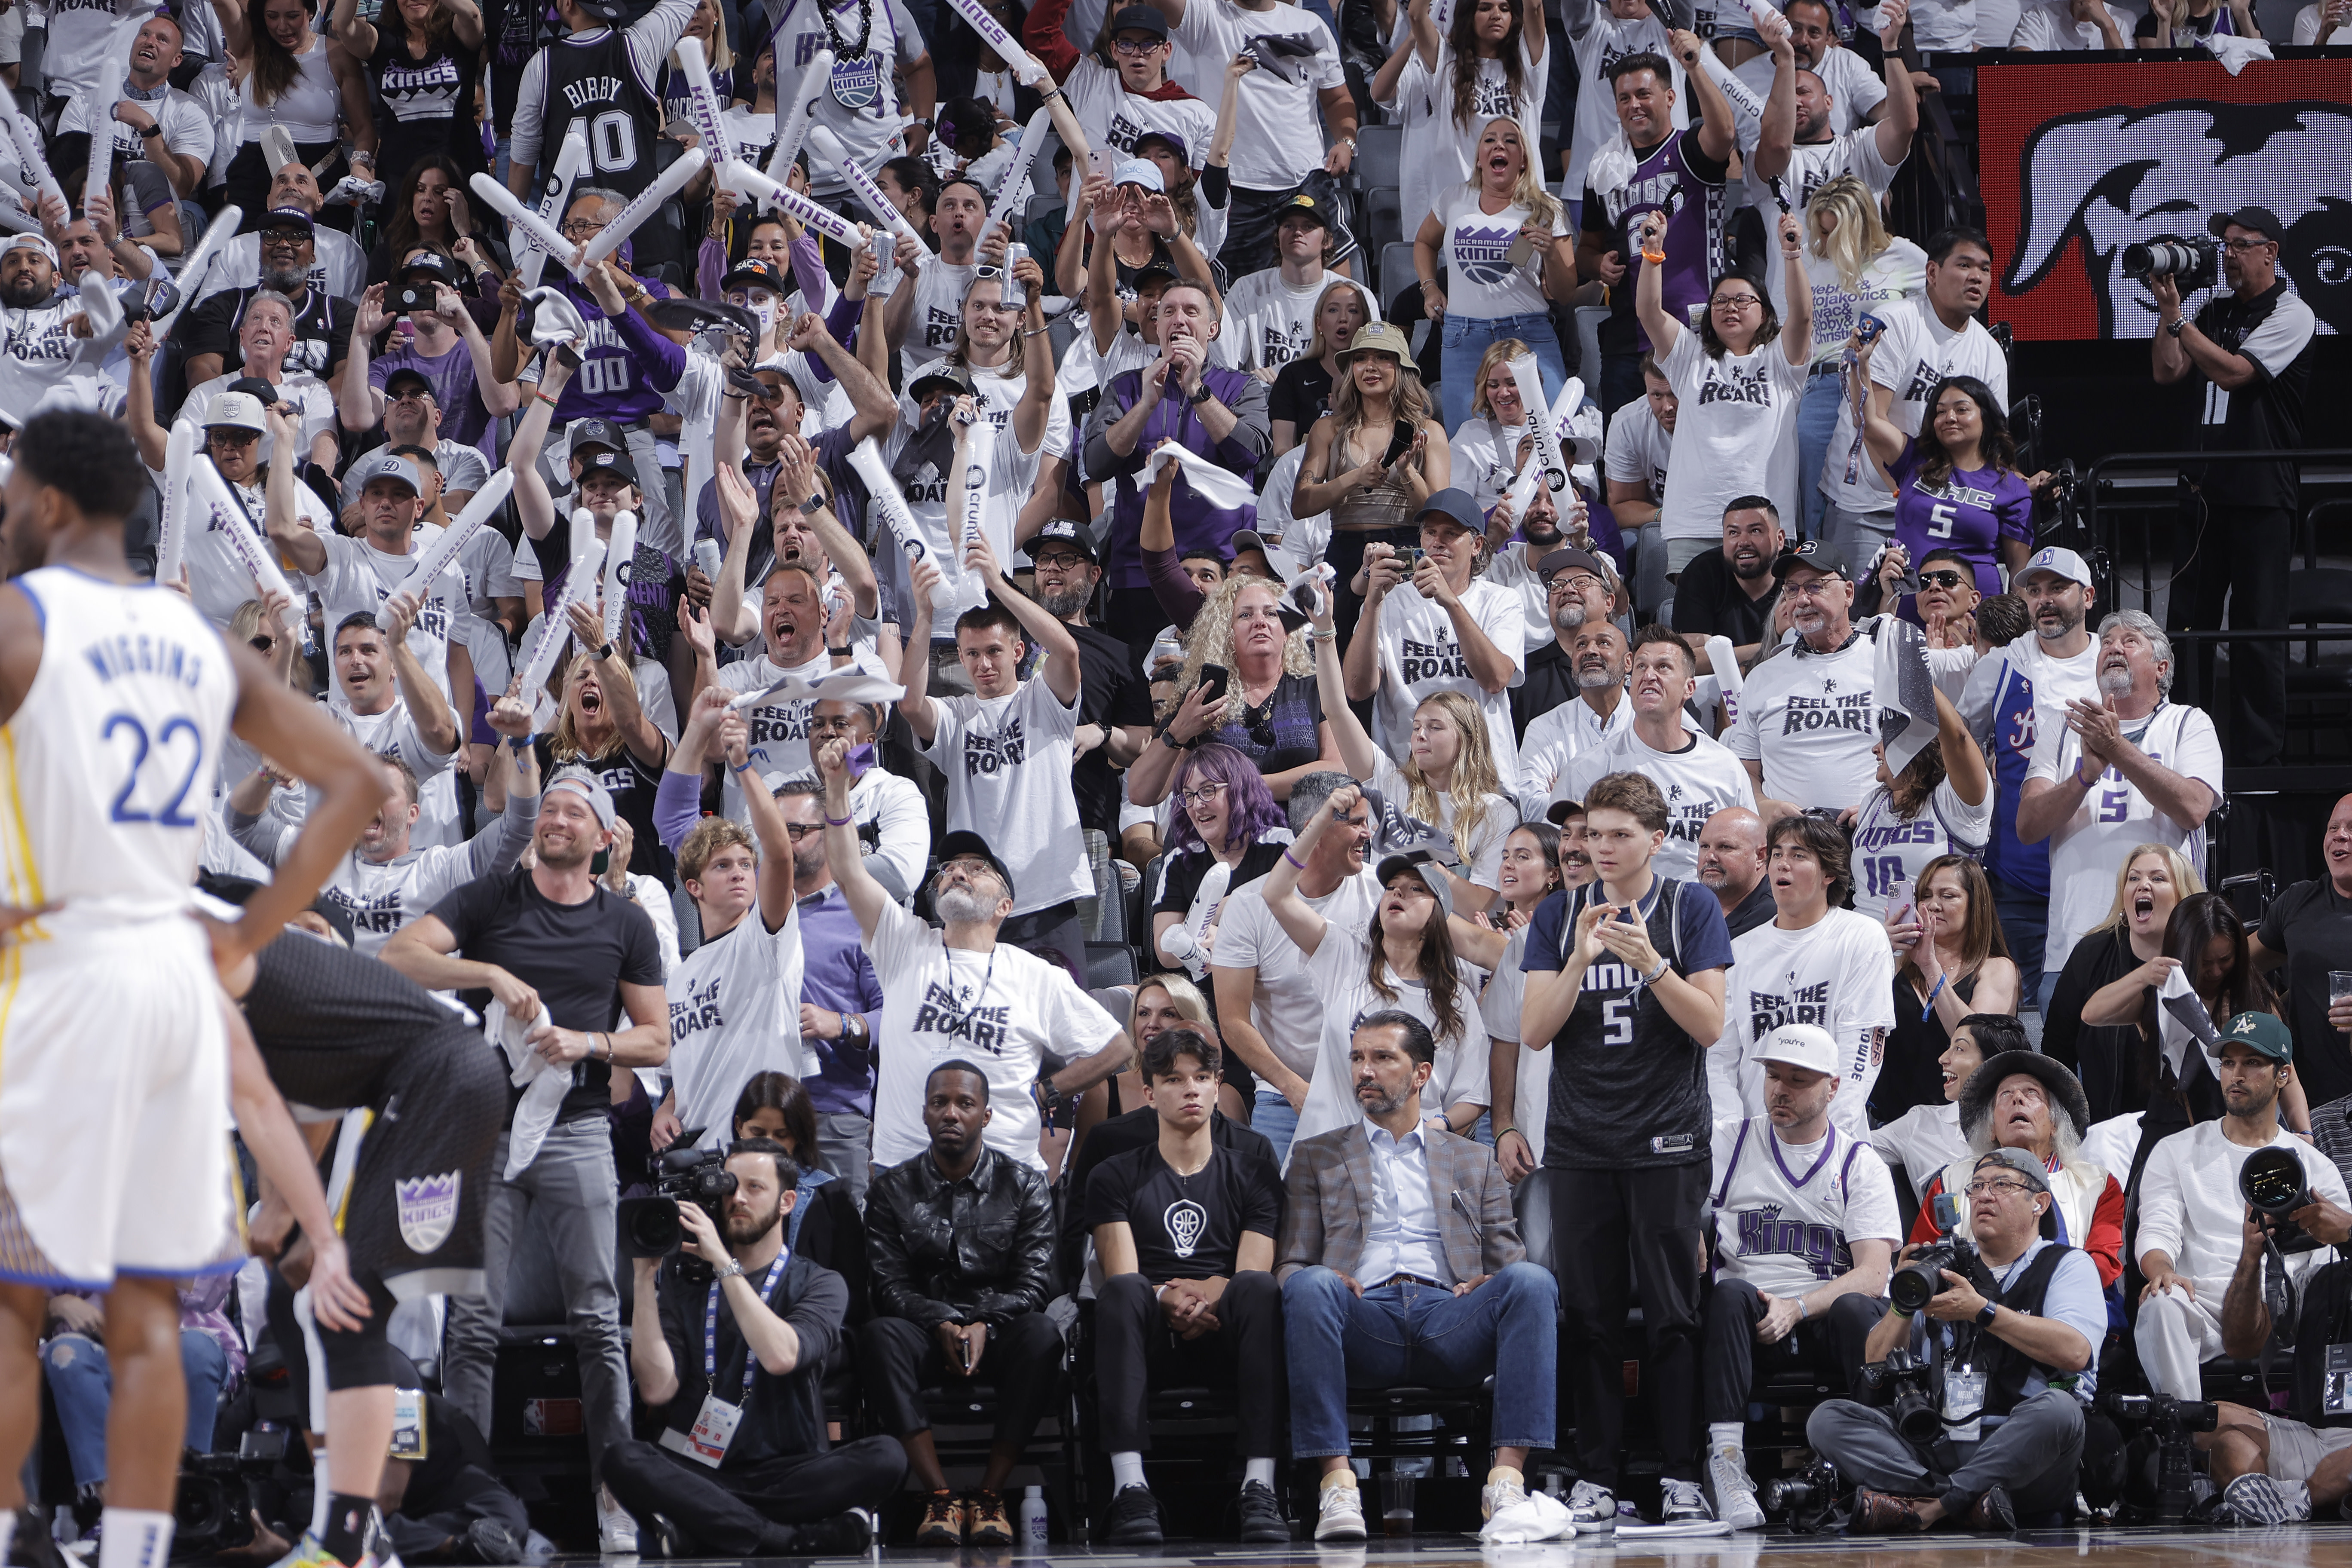 Sacramento Kings tickets are the hottest in the NBA playoffs